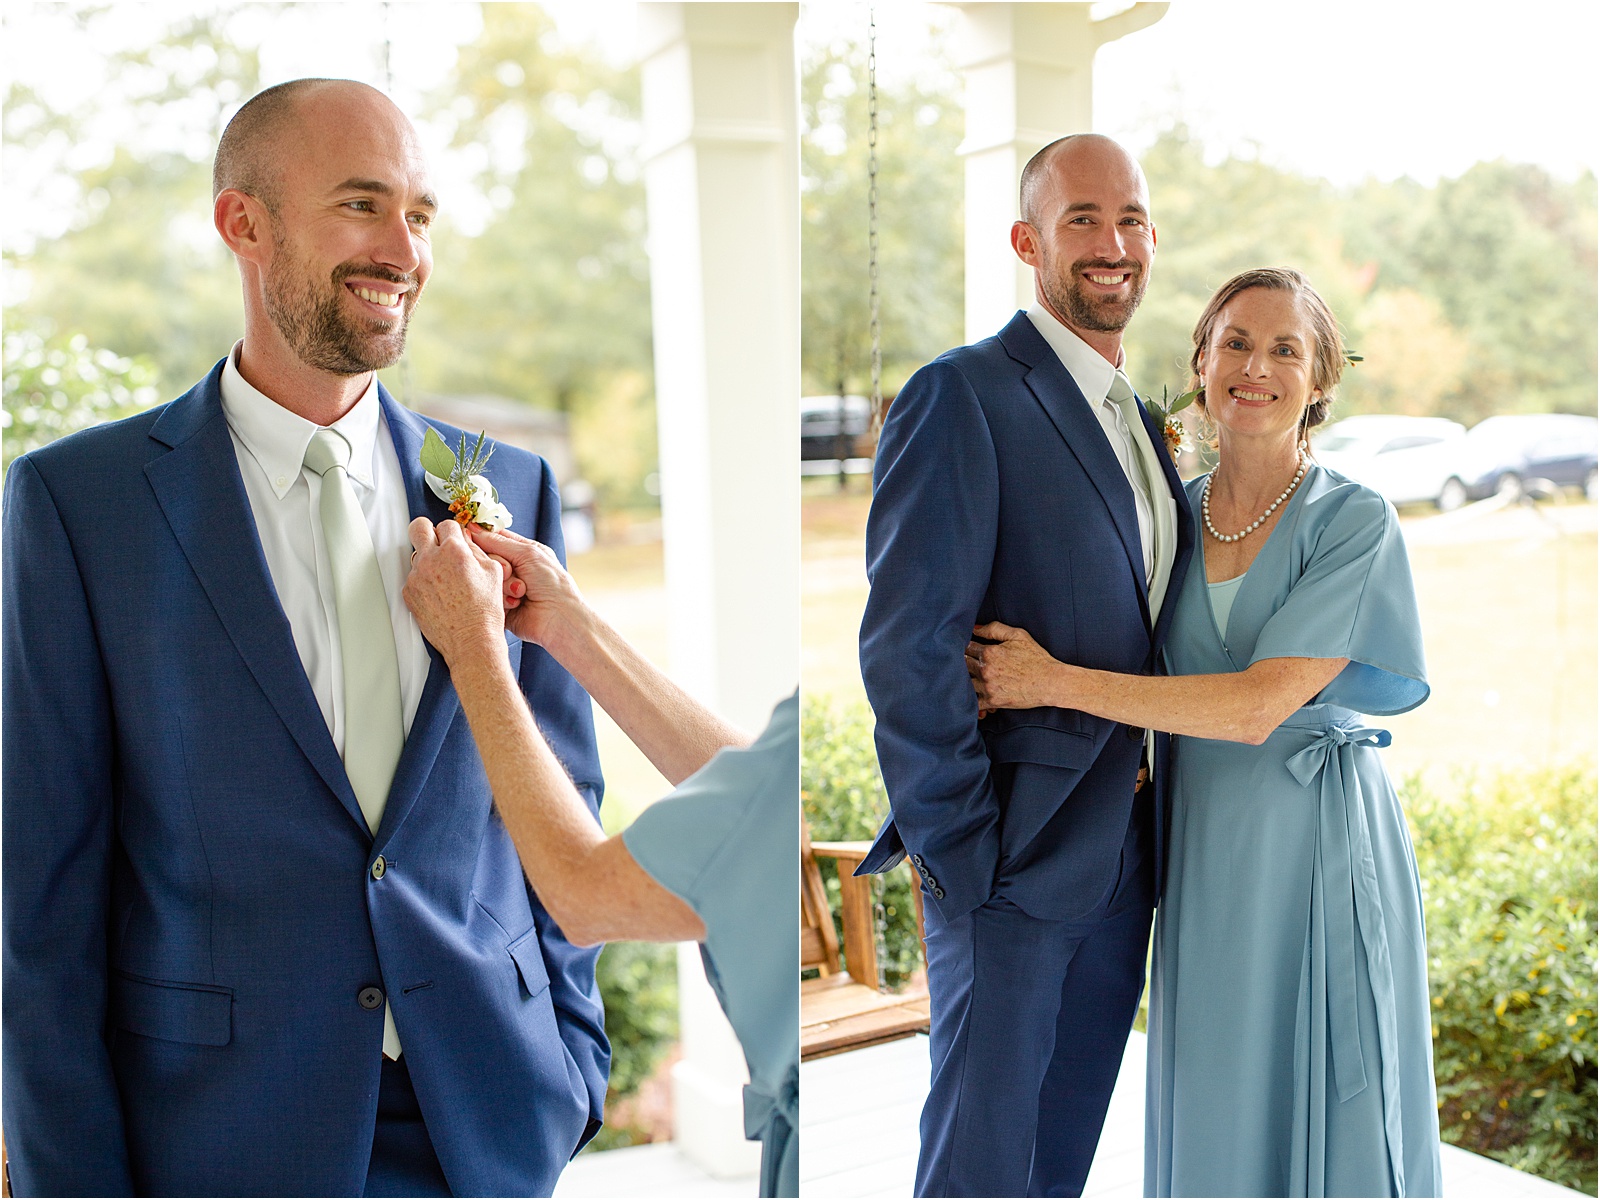 Portraits of groom and his mom